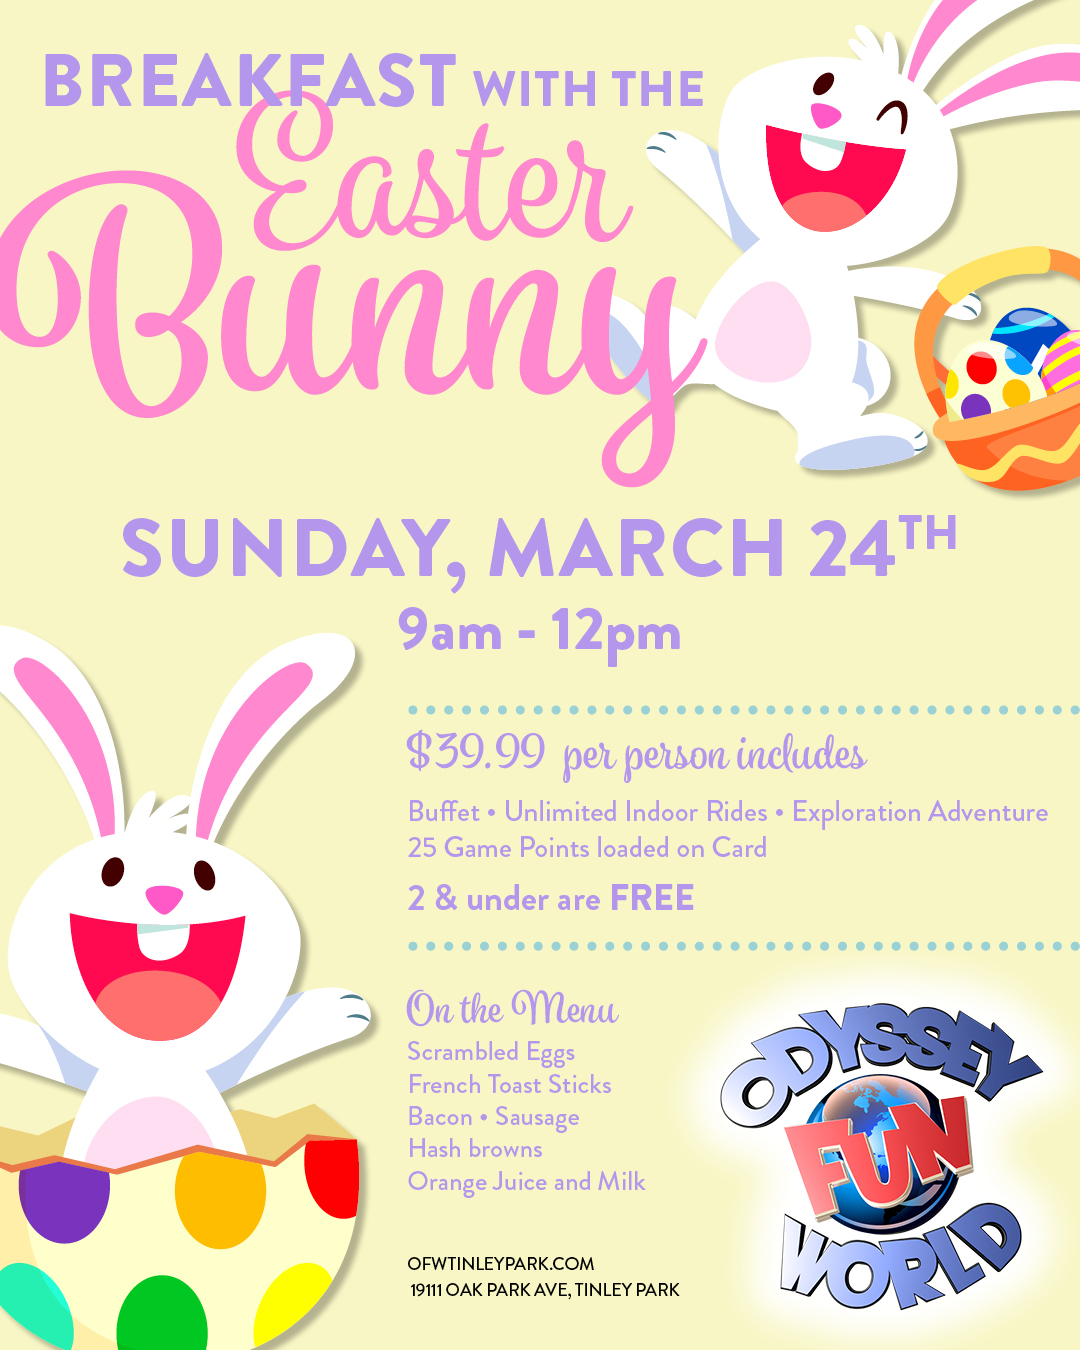 Odyssey Fun World Breakfast with Easter Bunny